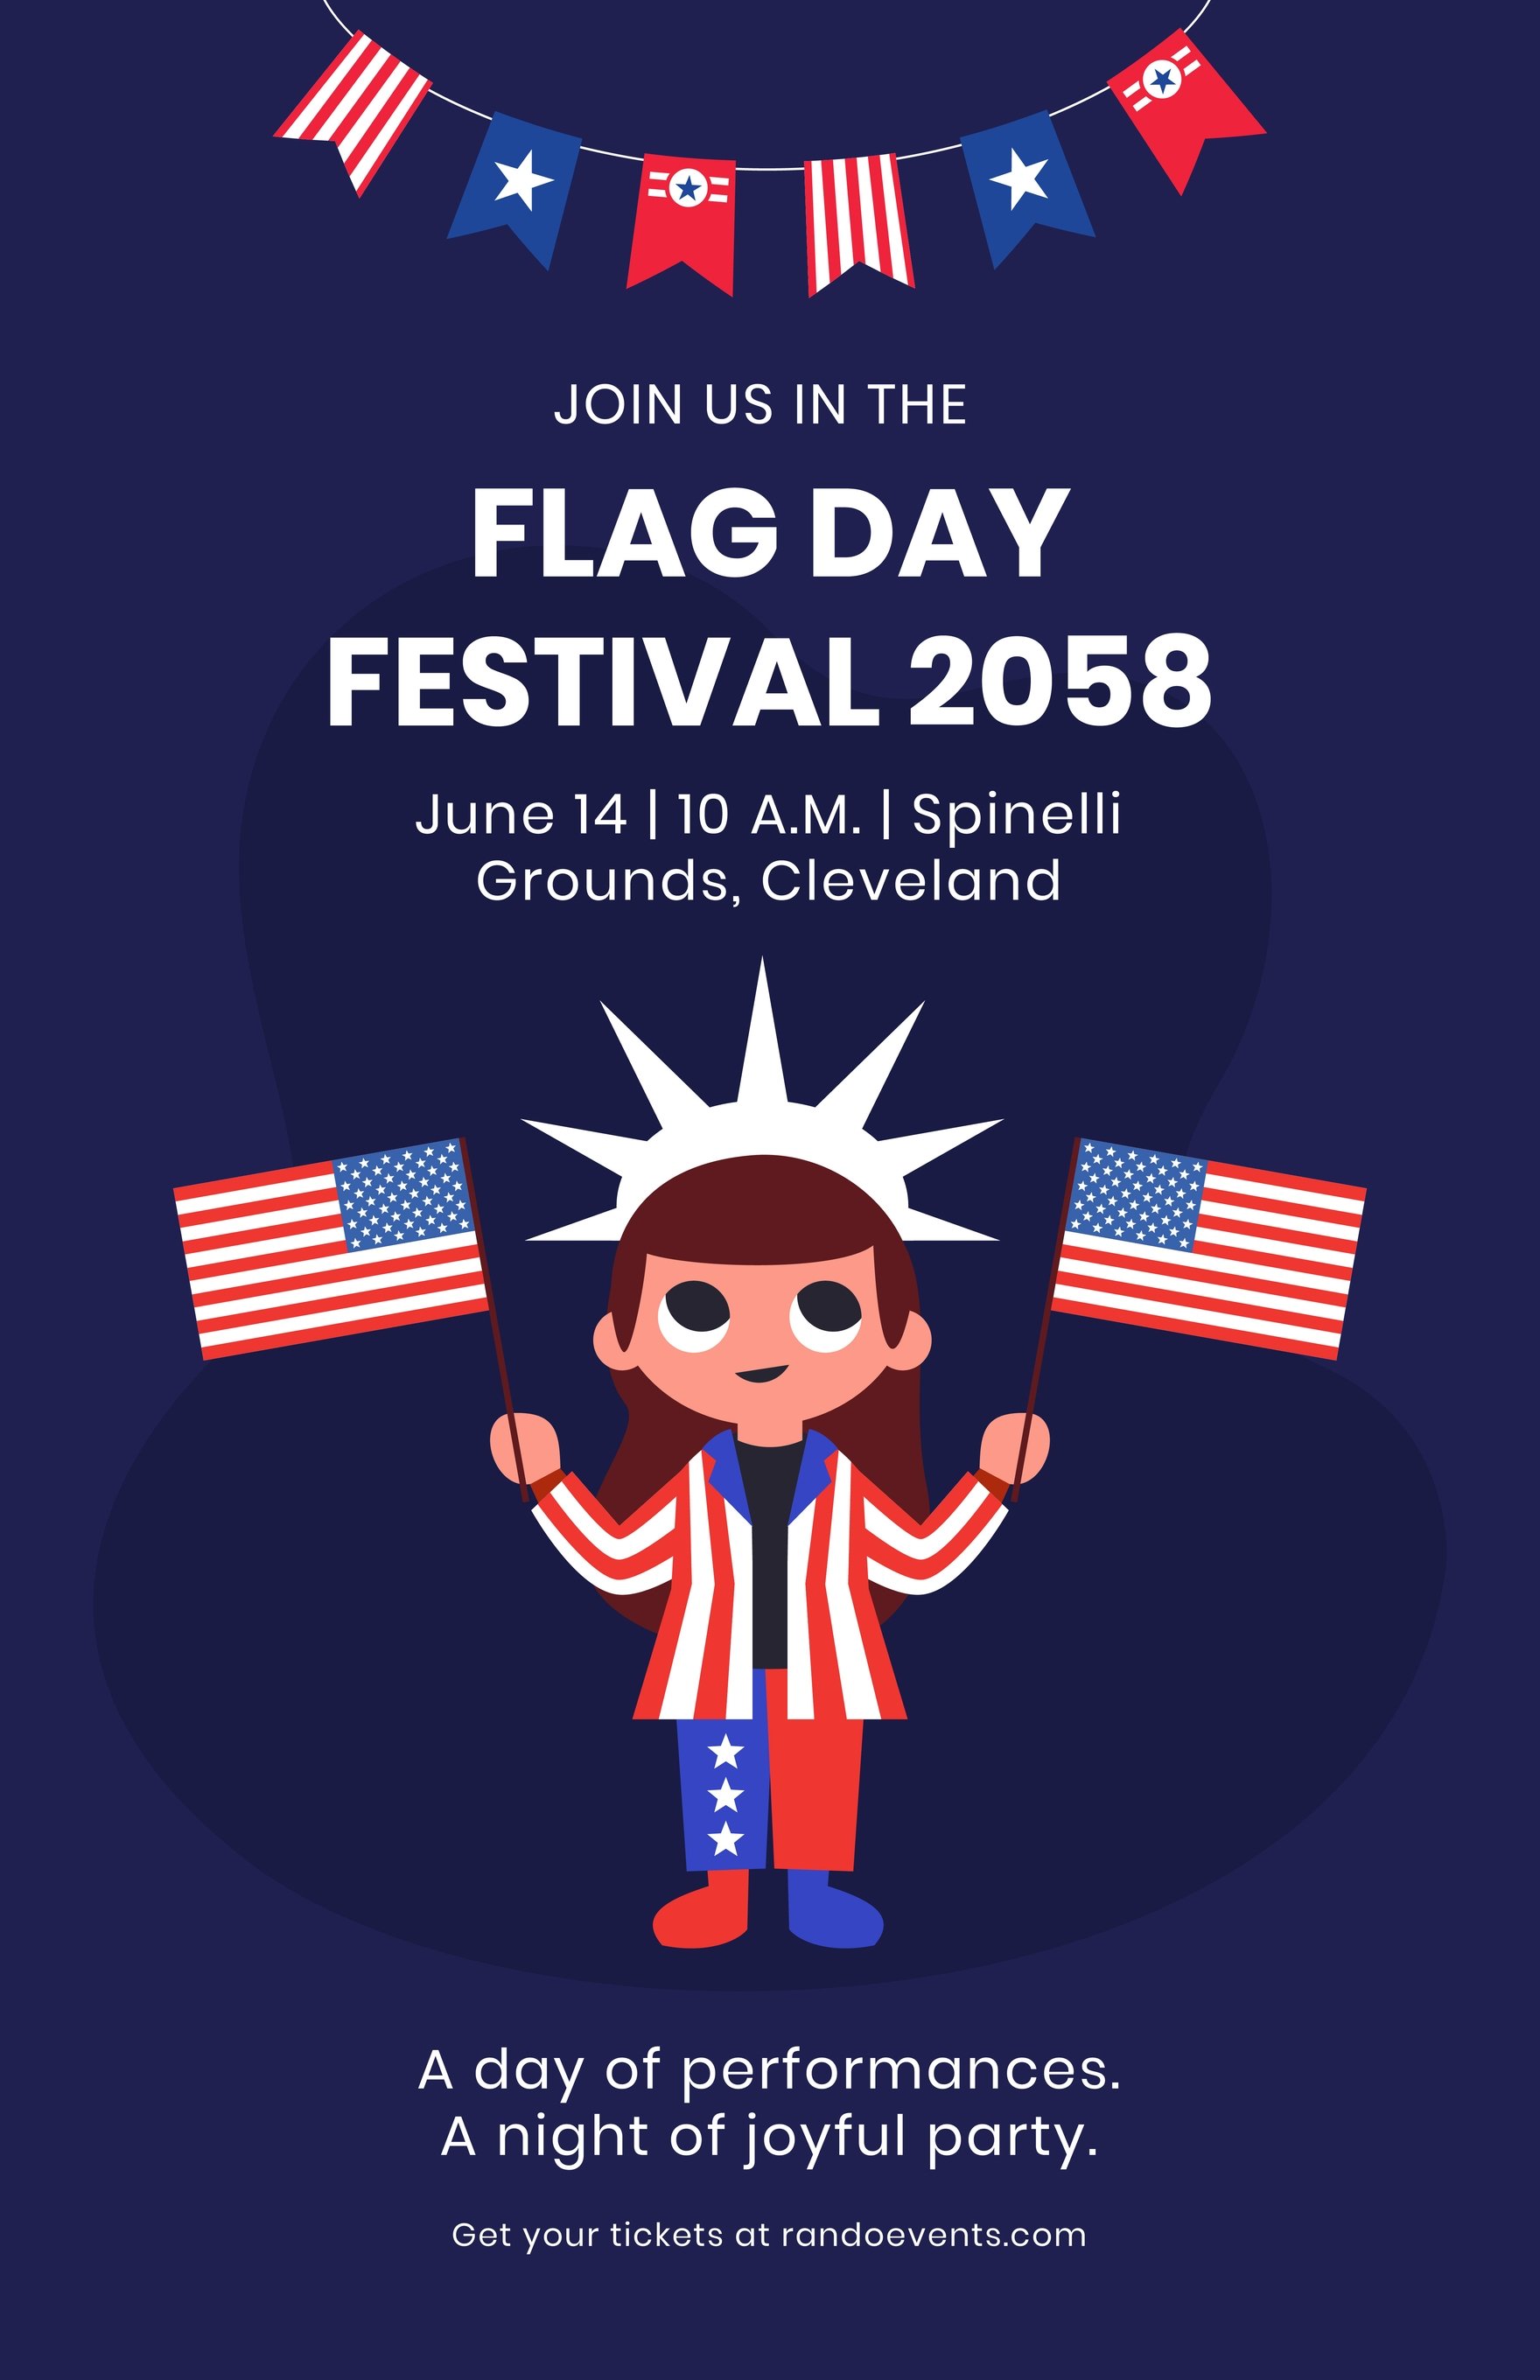 Free Flag Day Festival Poster Template in Word, Illustrator, PSD, Apple Pages